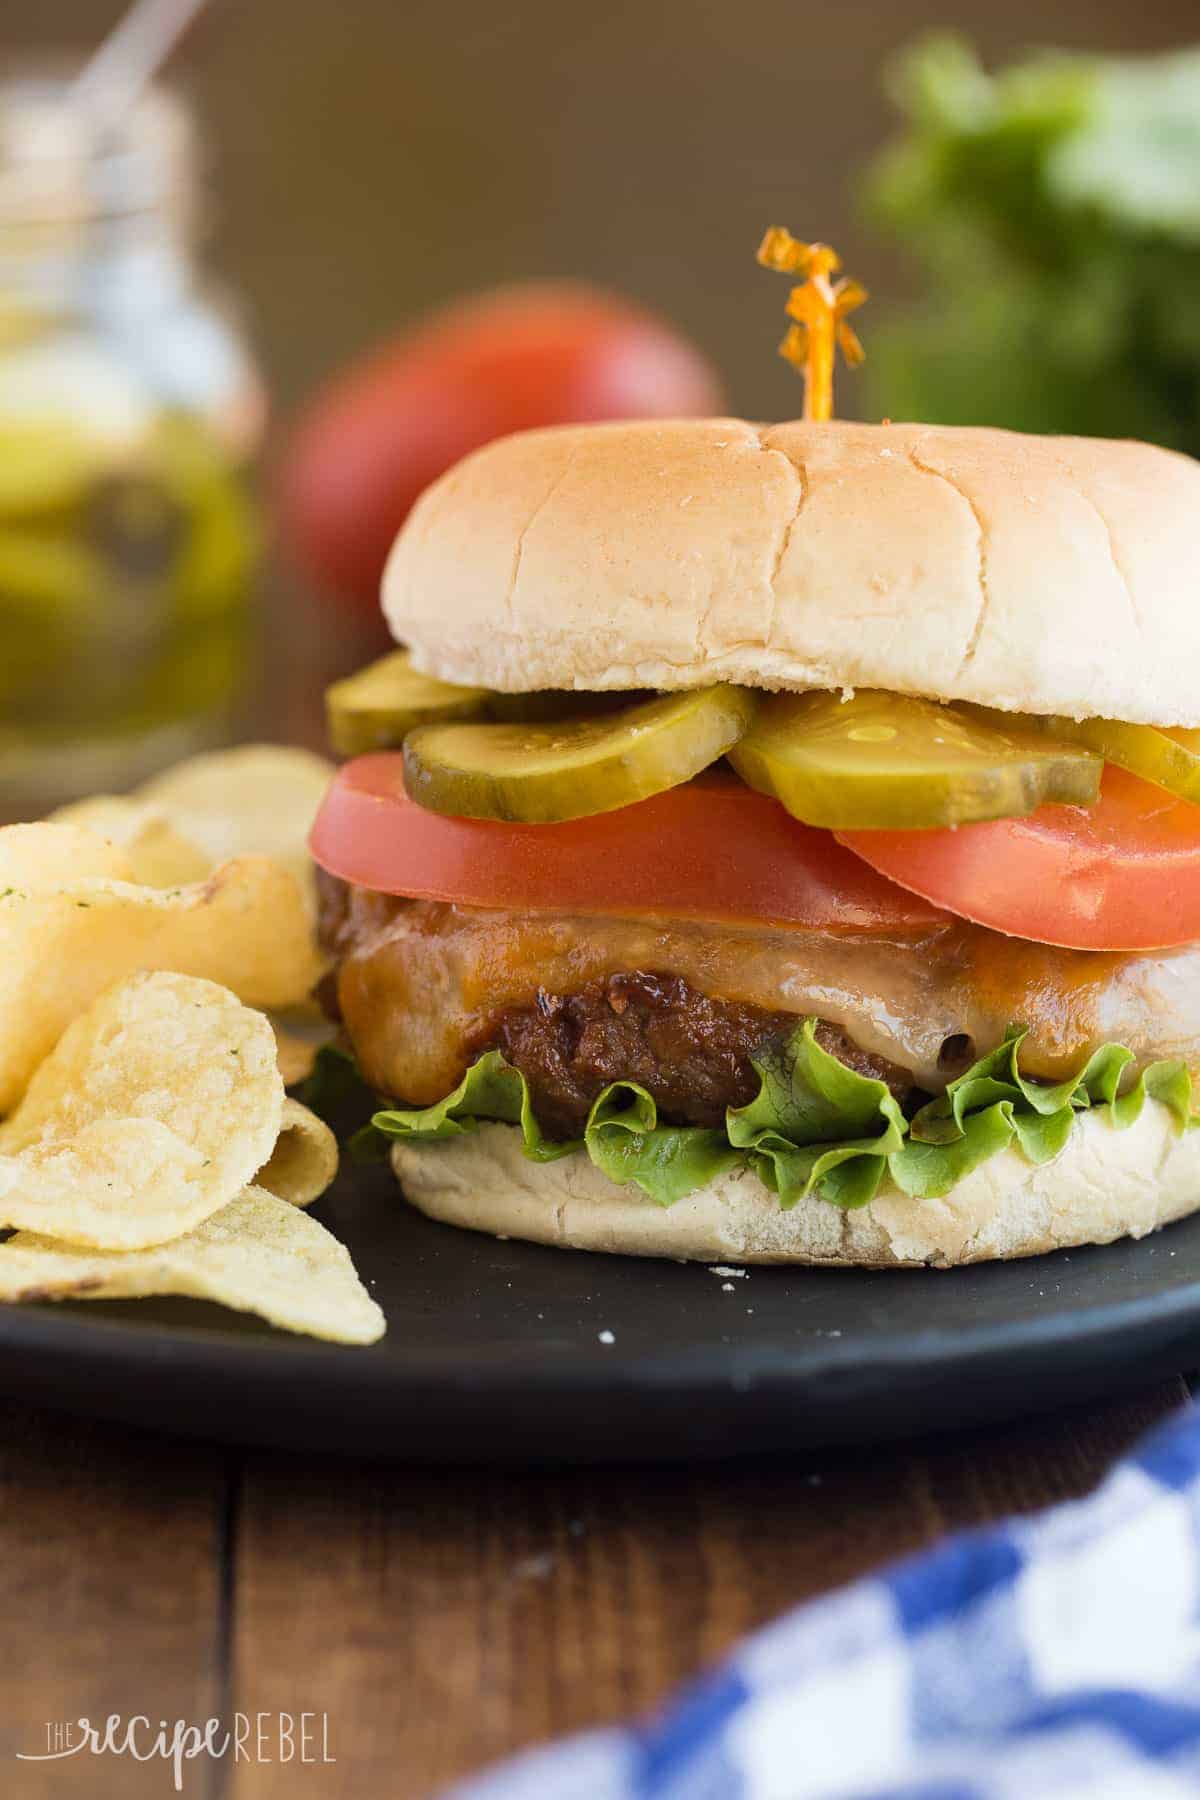 Best Beef Burger Recipe : The Best Burgers Recipe - SO flavorful! : How ...